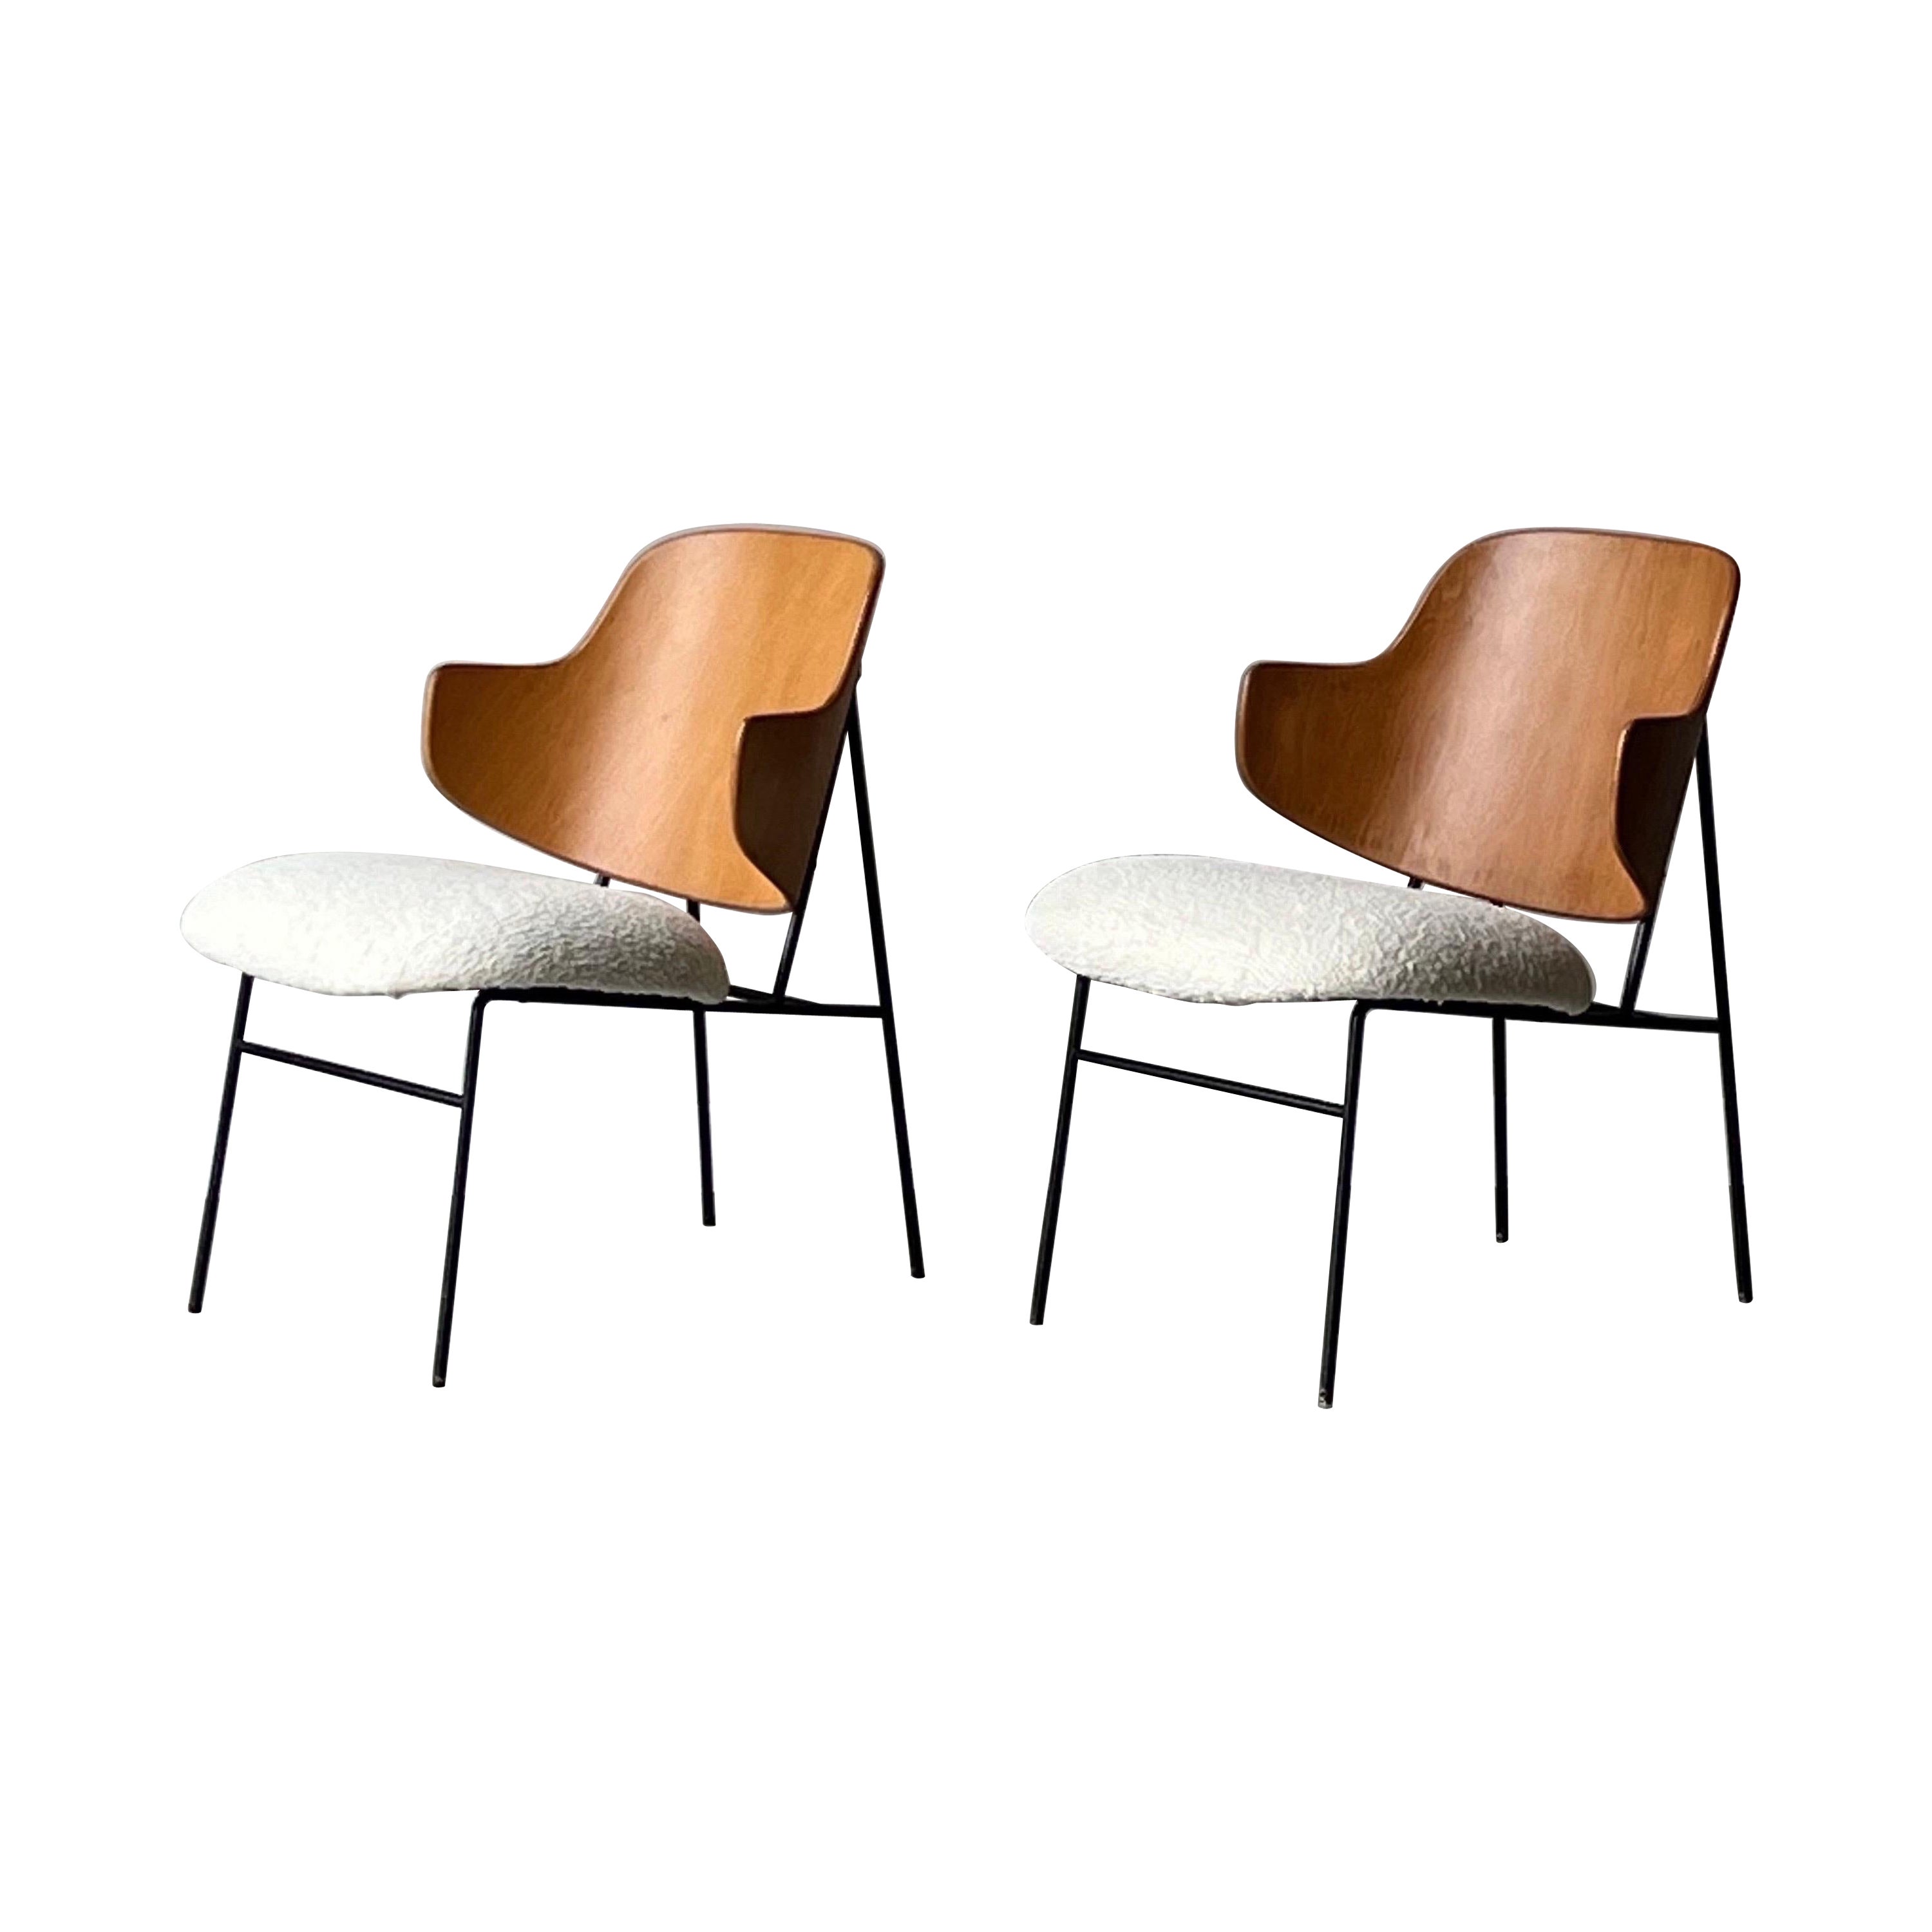 Mid-Century Kofod Larsen Penguin Chairs - a Pair For Sale